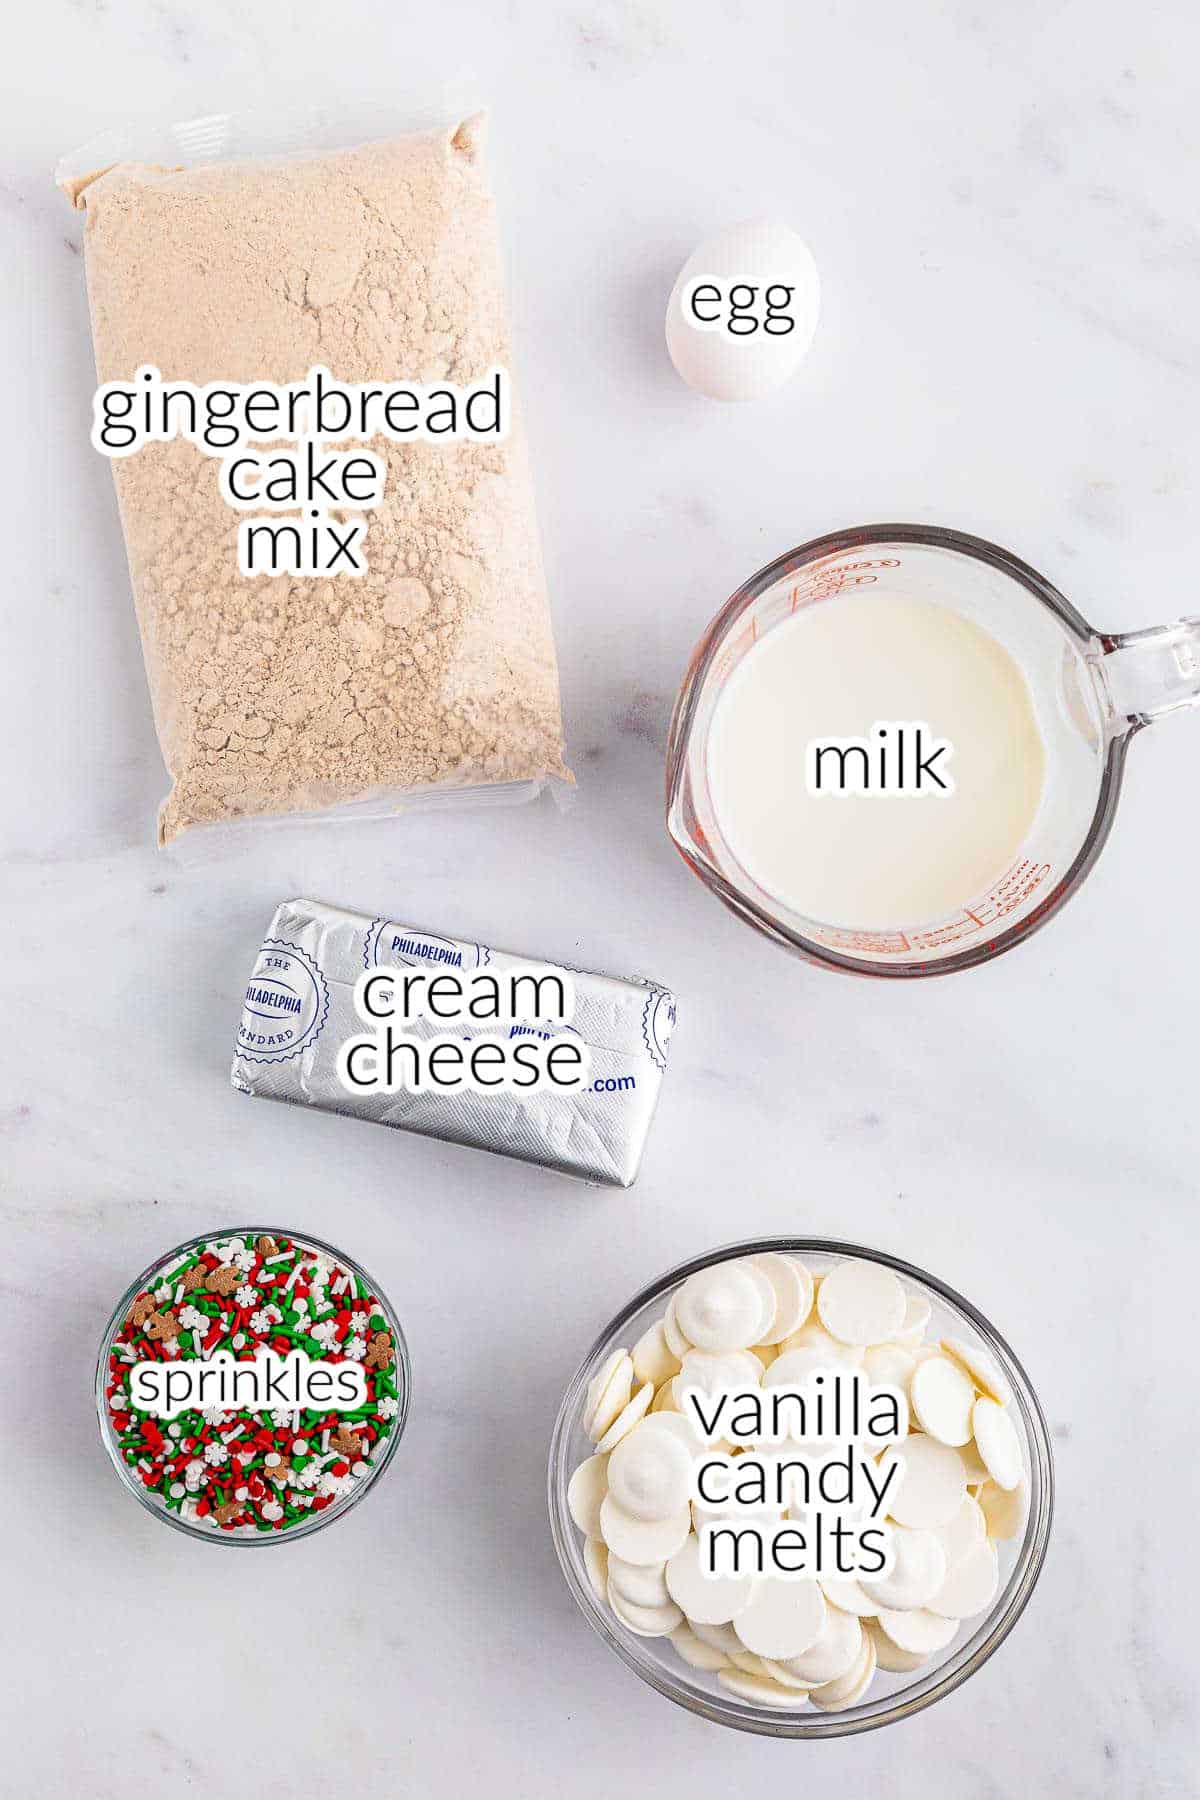 Ingredients for gingerbread truffles - eggs, milk, gingerbread cake mix, cream cheese, sprinkles and vanilla candy melts.